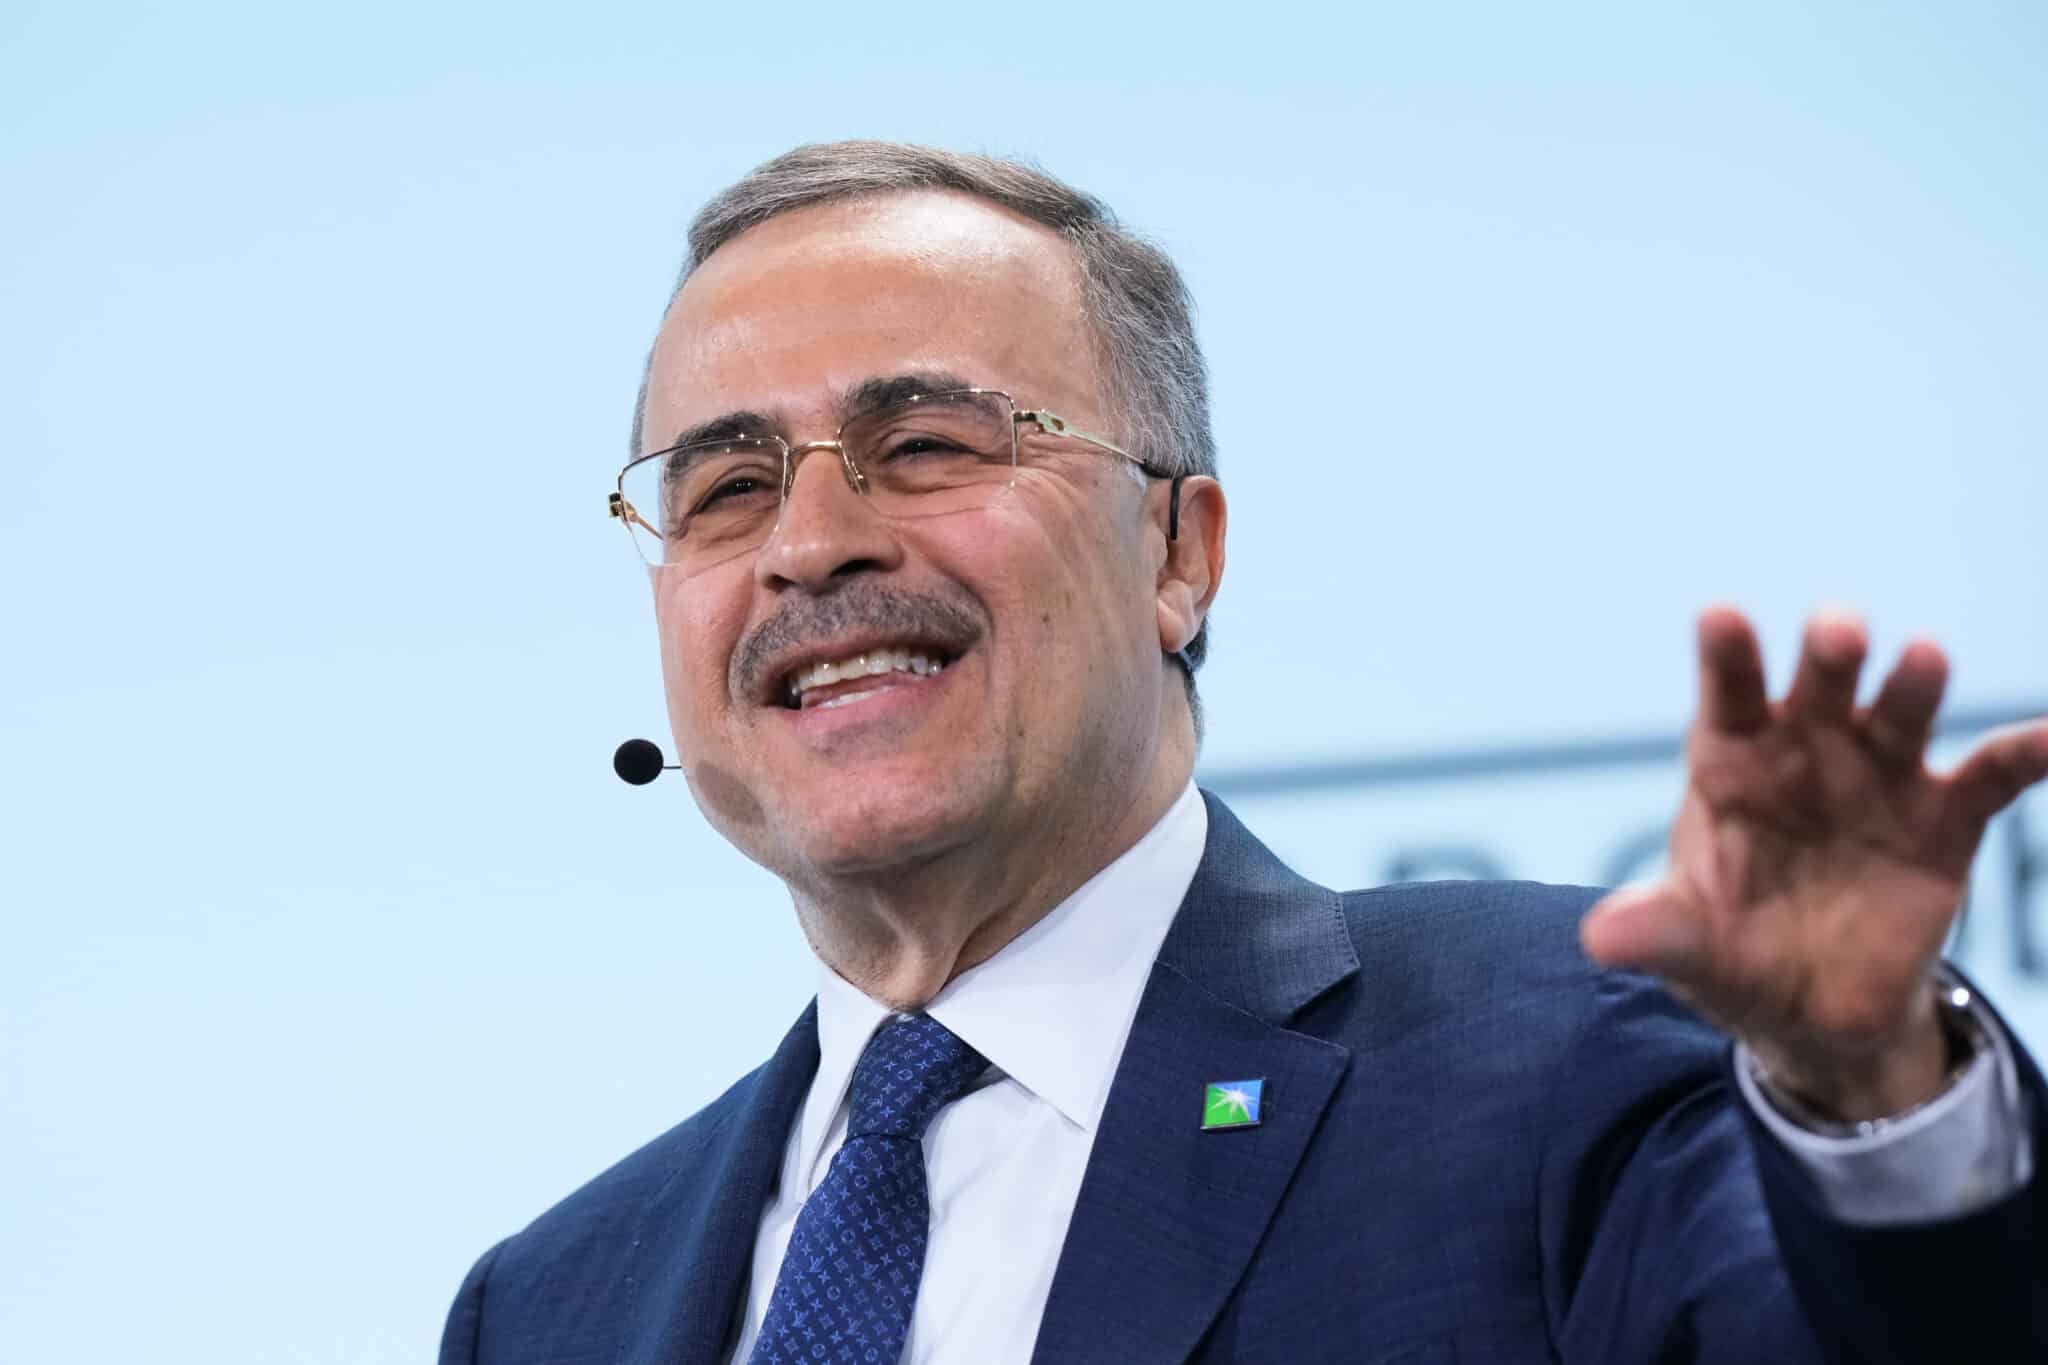 CEO of Saudi Aramco Asserts that Energy Transition is Faltering and Urges the World to Reject “Fantasy” of Eliminating Oil